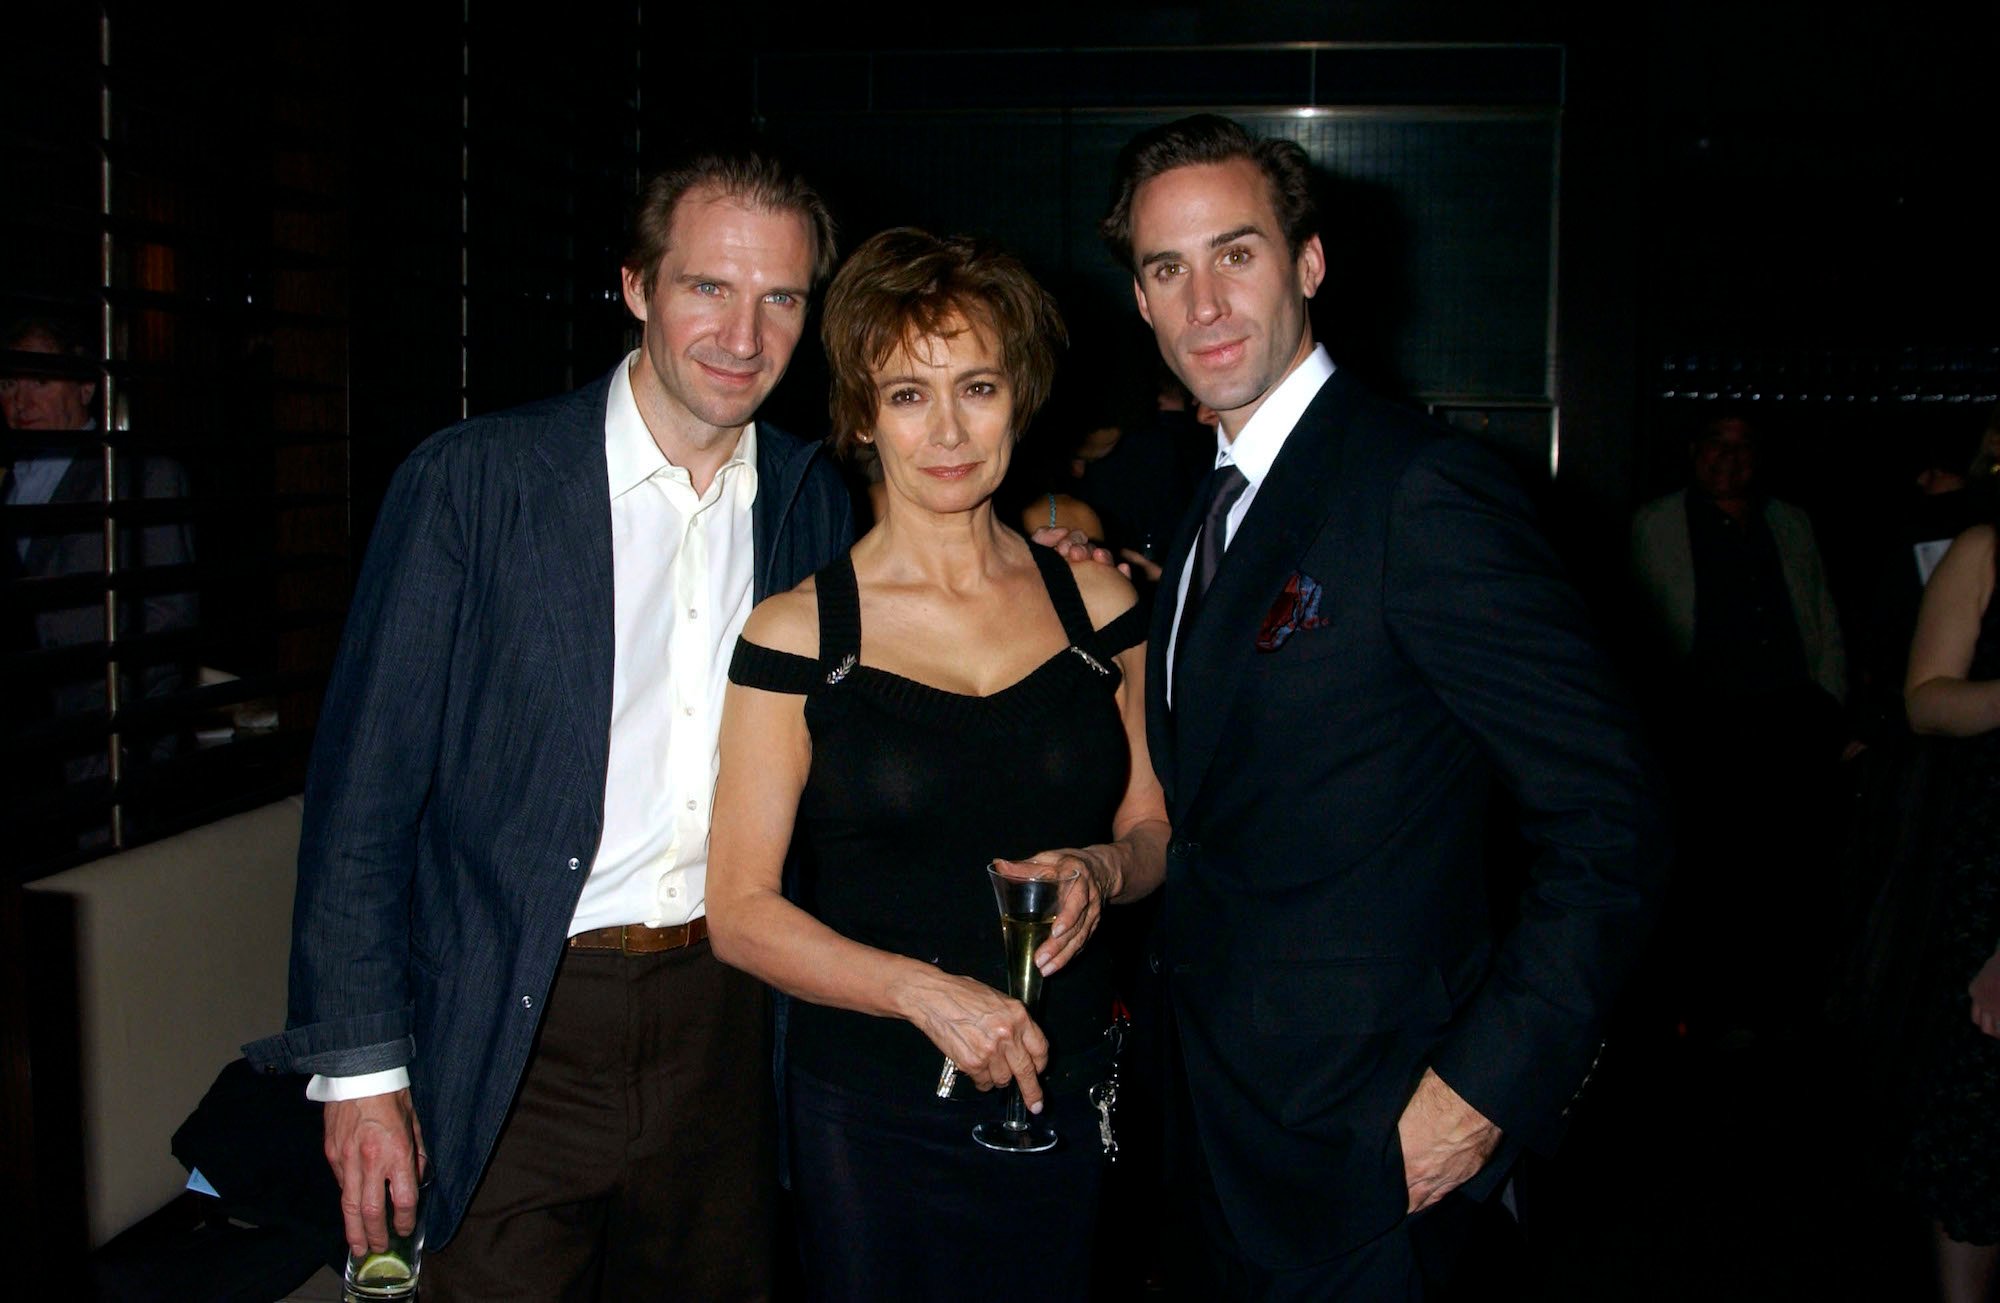 Ralph Fiennes, Francesca Annis, and Joseph Fiennes smiling in front of a dark background